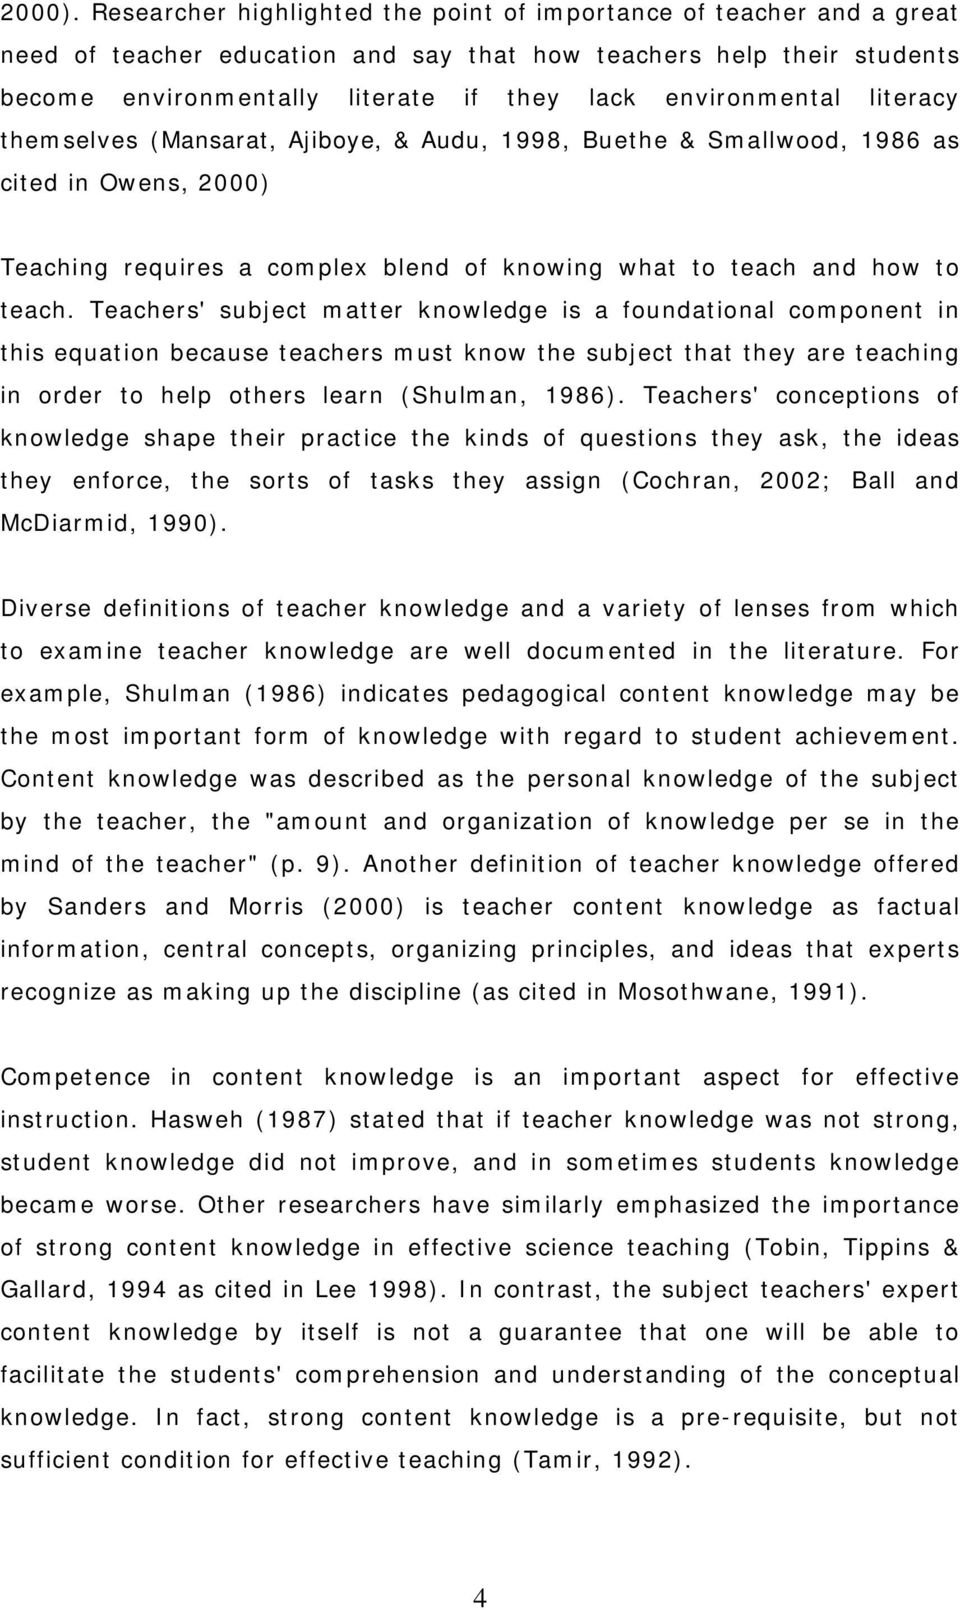 environmental literacy themselves (Mansarat, Ajiboye, & Audu, 1998, Buethe & Smallwood, 1986 as cited in Owens, 2000) Teaching requires a complex blend of knowing what to teach and how to teach.